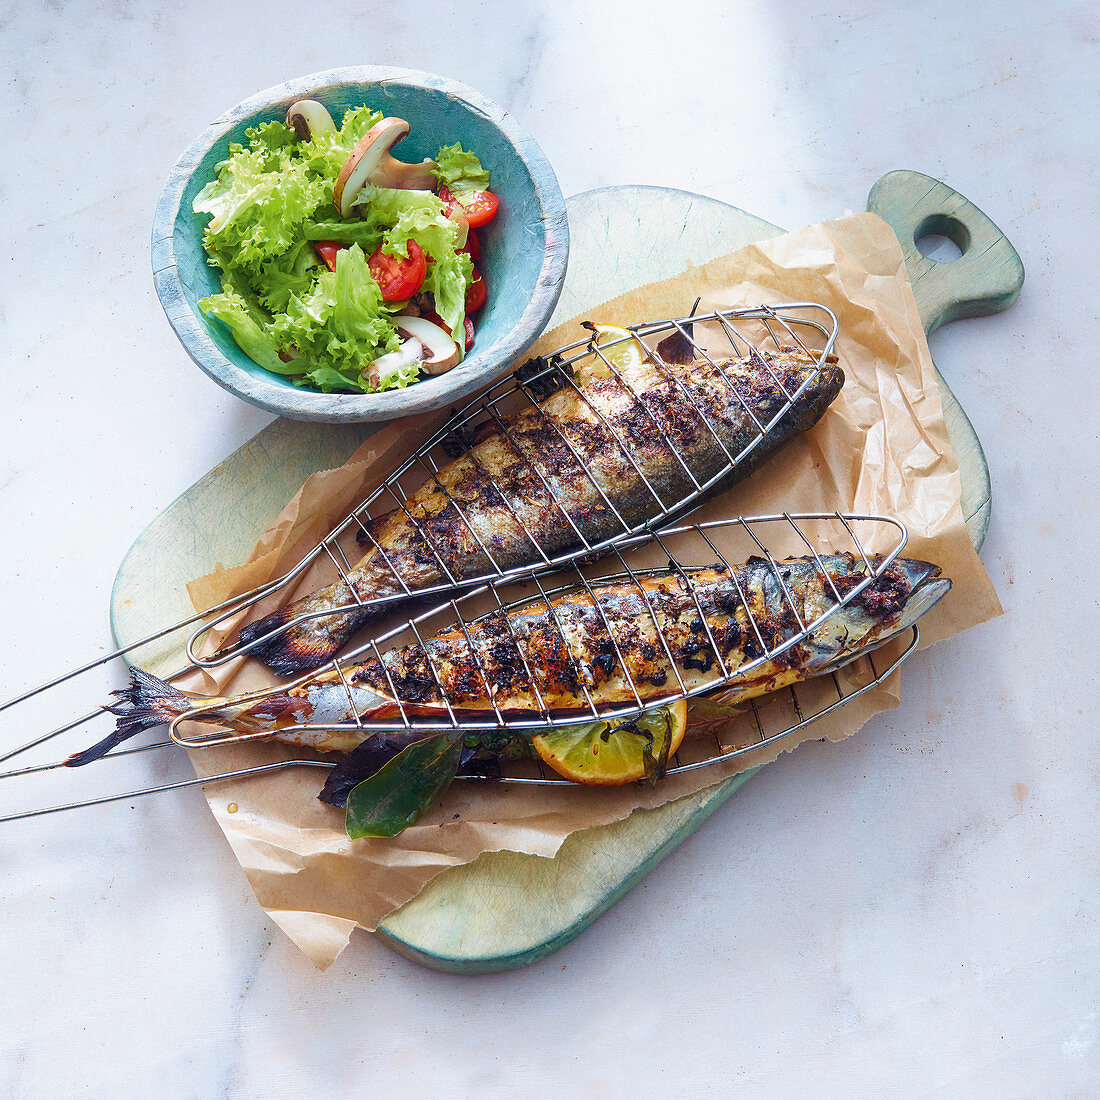 Grilled trout and mackerel